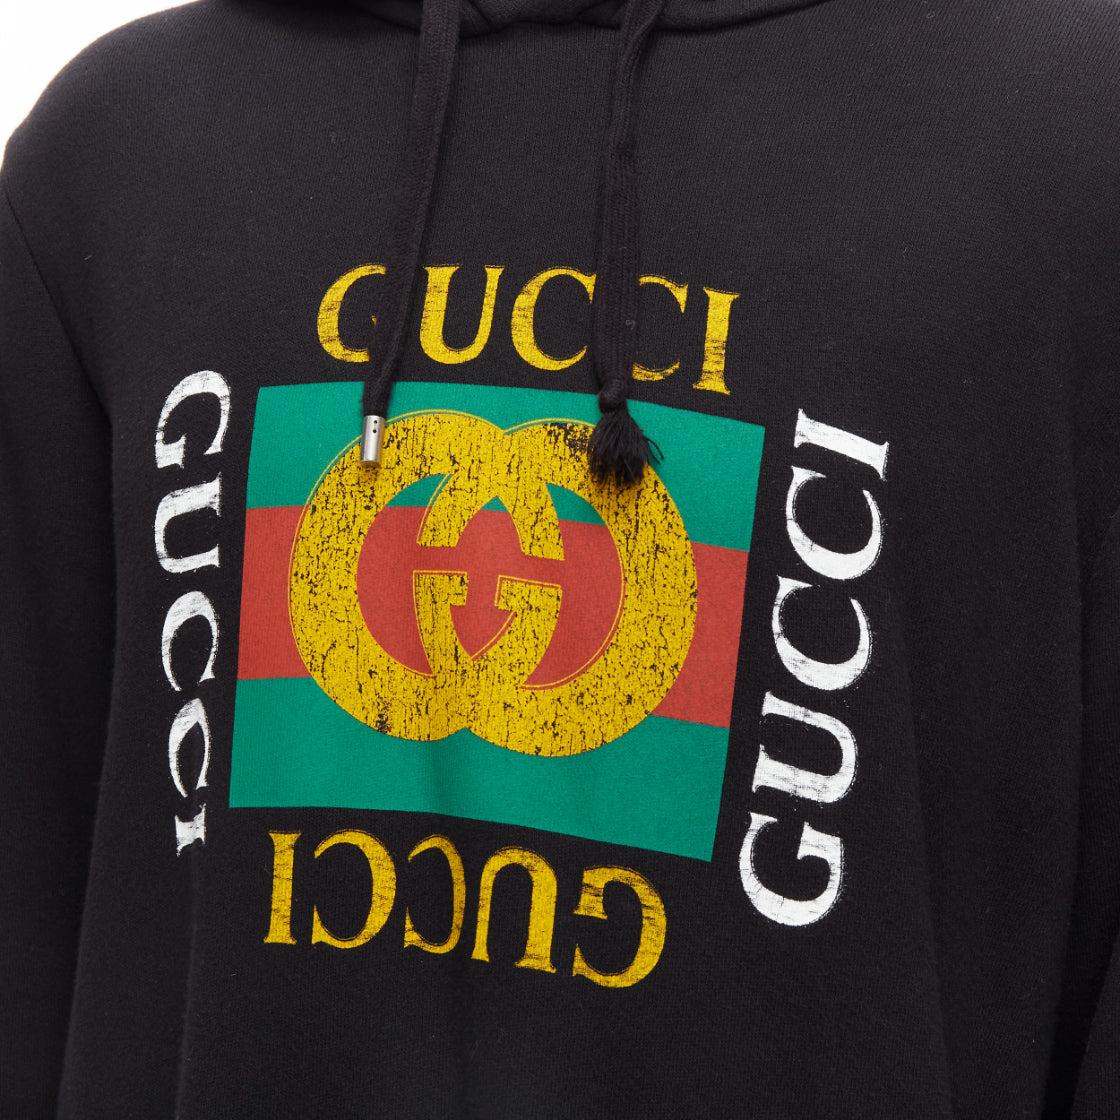 GUCCI black cotton yellow vintage box logo drop shoulder hoodie L
Reference: YIKK/A00022
Brand: Gucci
Designer: Alessandro Michele
Material: Cotton
Color: Black, Yellow
Pattern: Logomania
Closure: Pullover
Made in: Italy

CONDITION:
Condition: